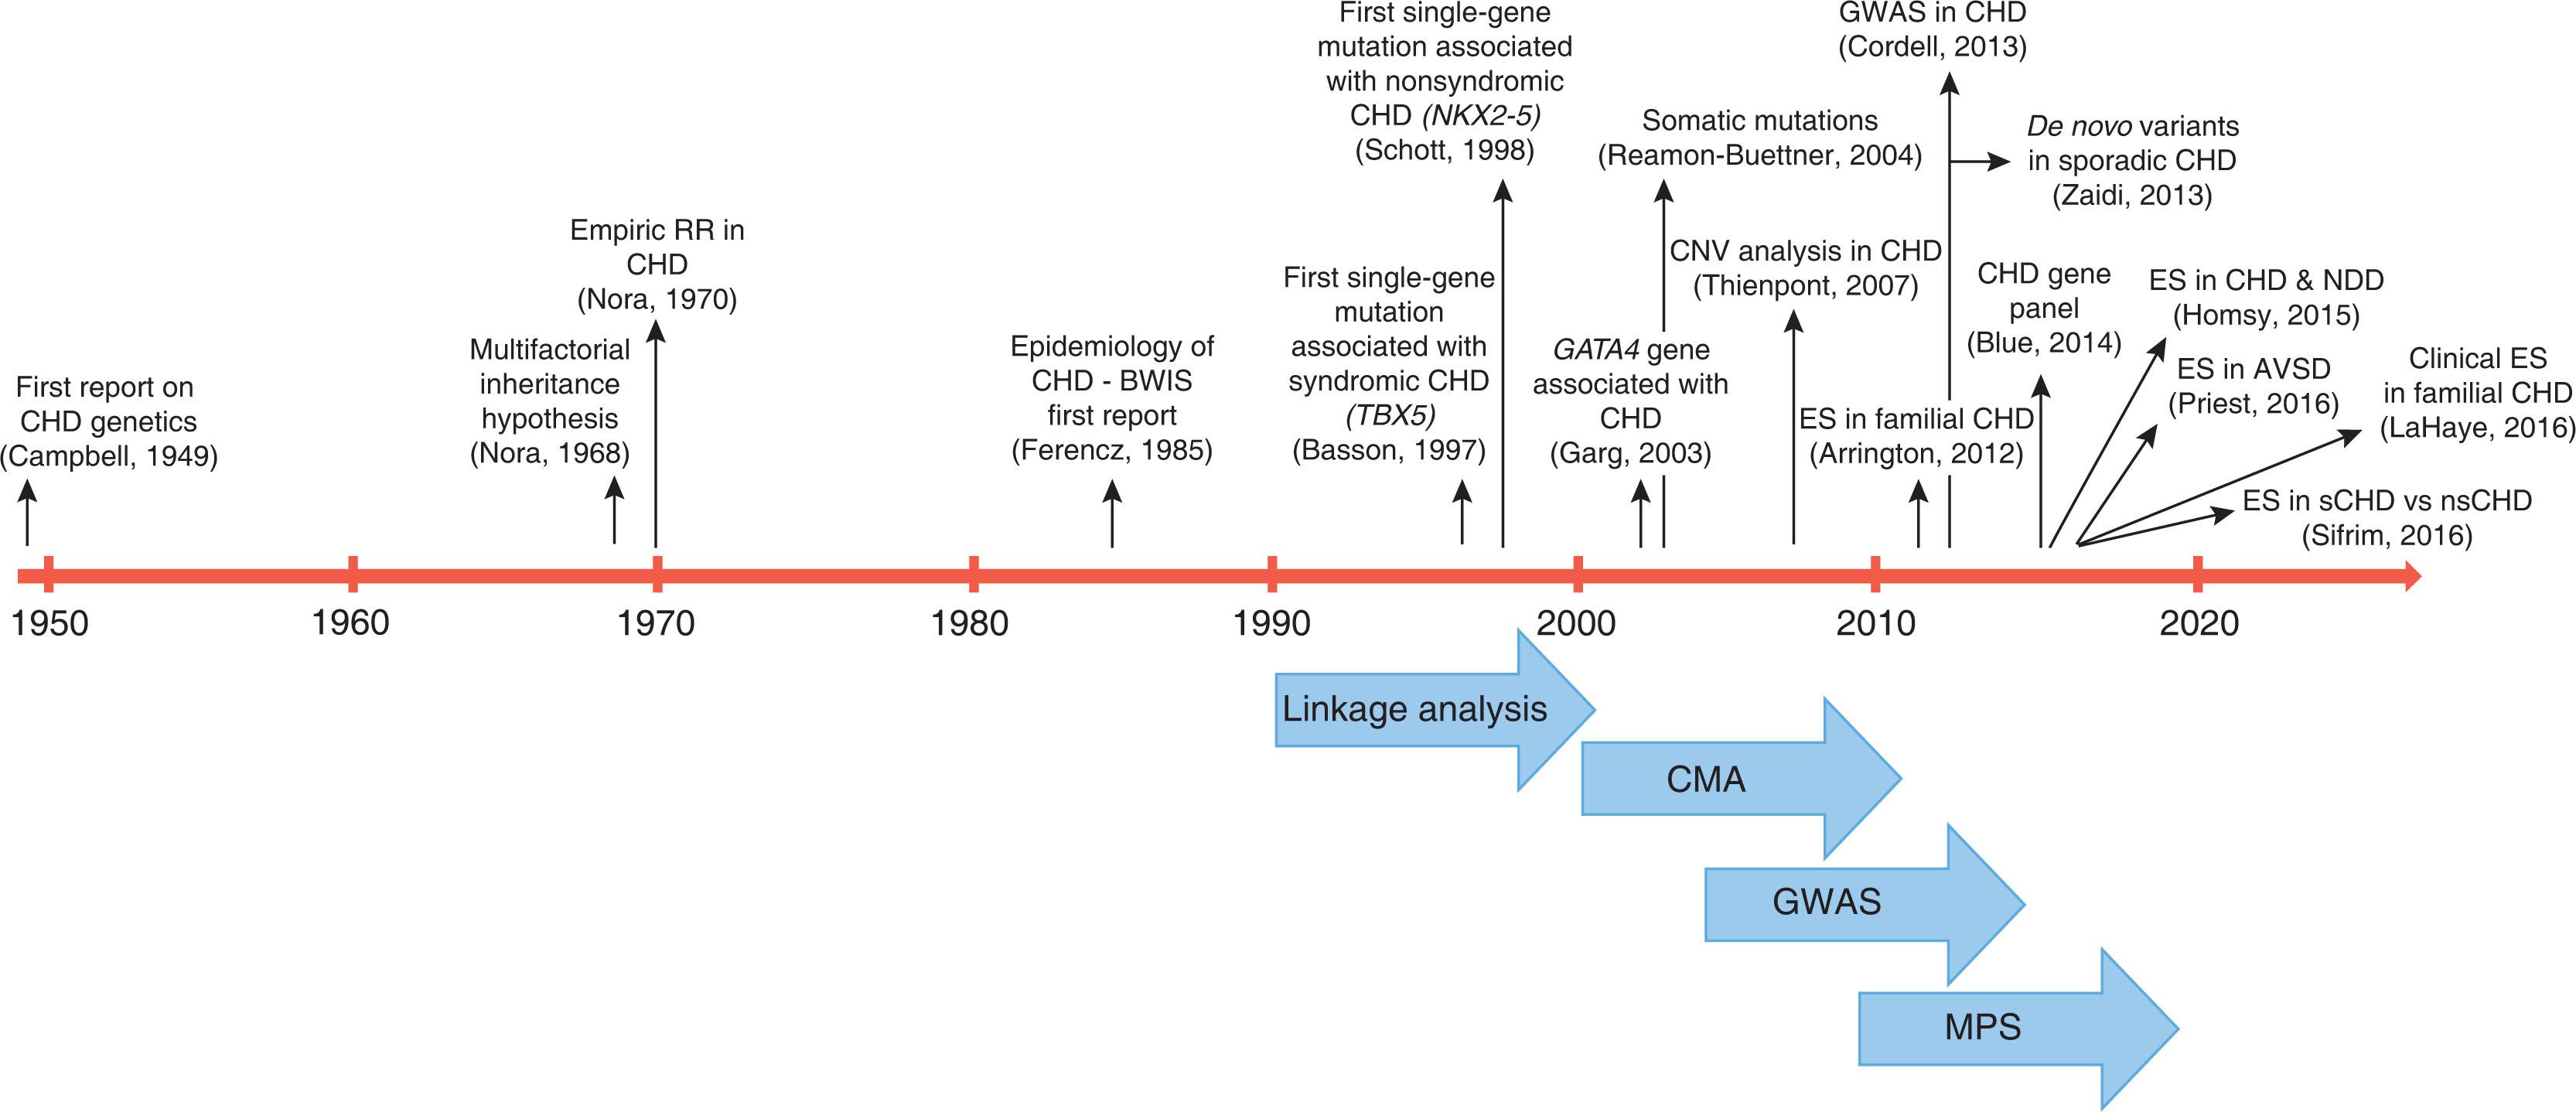 Fig. 50.2, Timeline of CHD genetic discoveries and the genetic technologies and study designs used. Genetic technologies/study designs are indicated by blue arrows and mark the approximate time when the technology was developed and used.